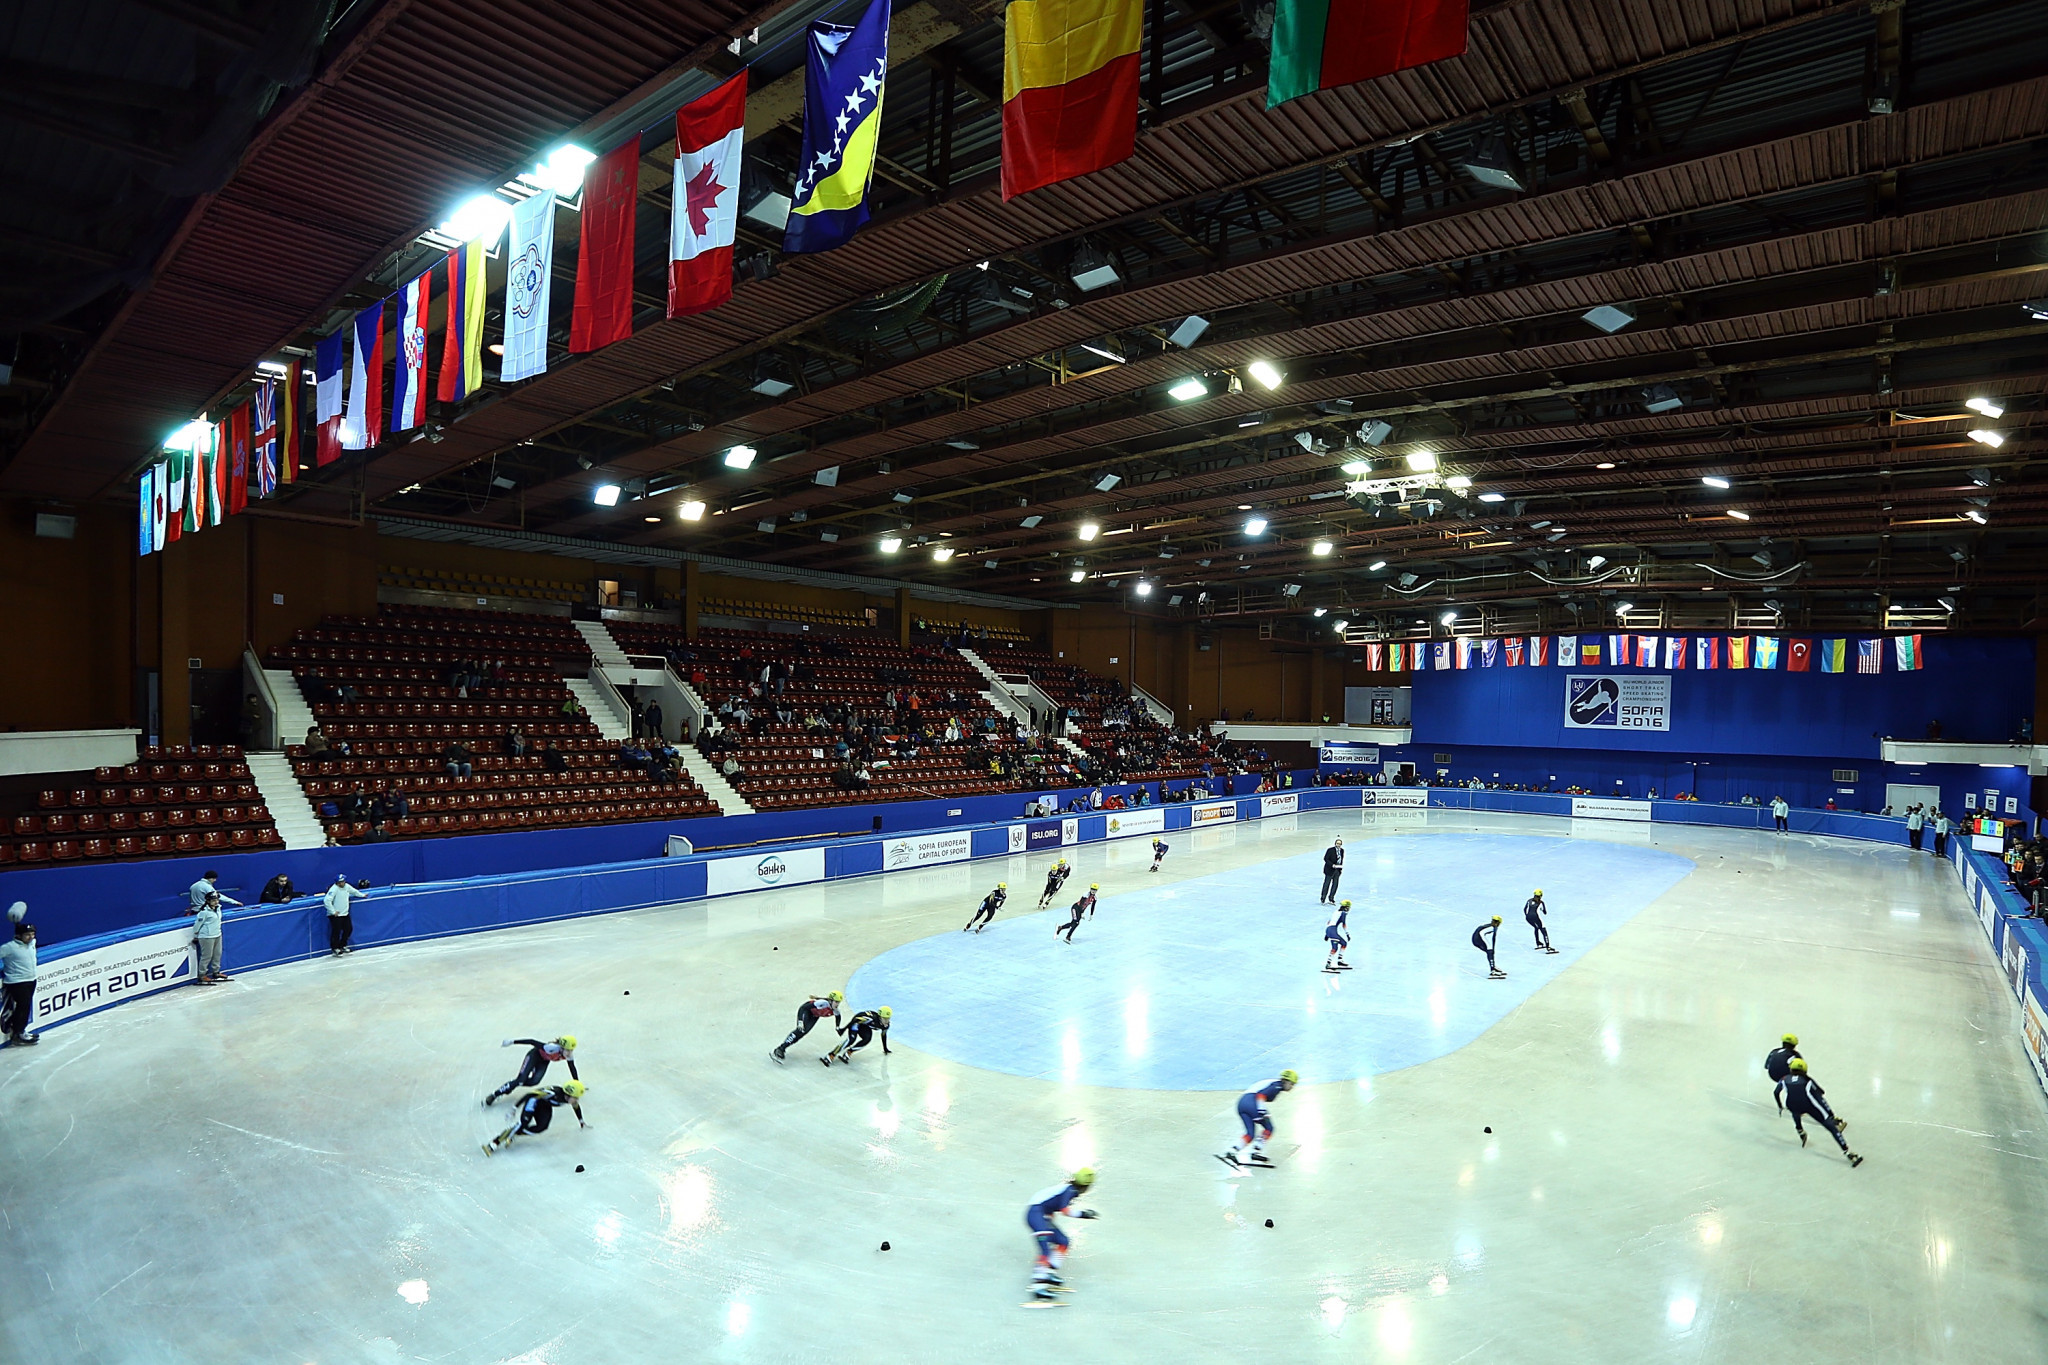 ISU confirms cancellation of Junior Speed Skating World Cup competition in Minsk